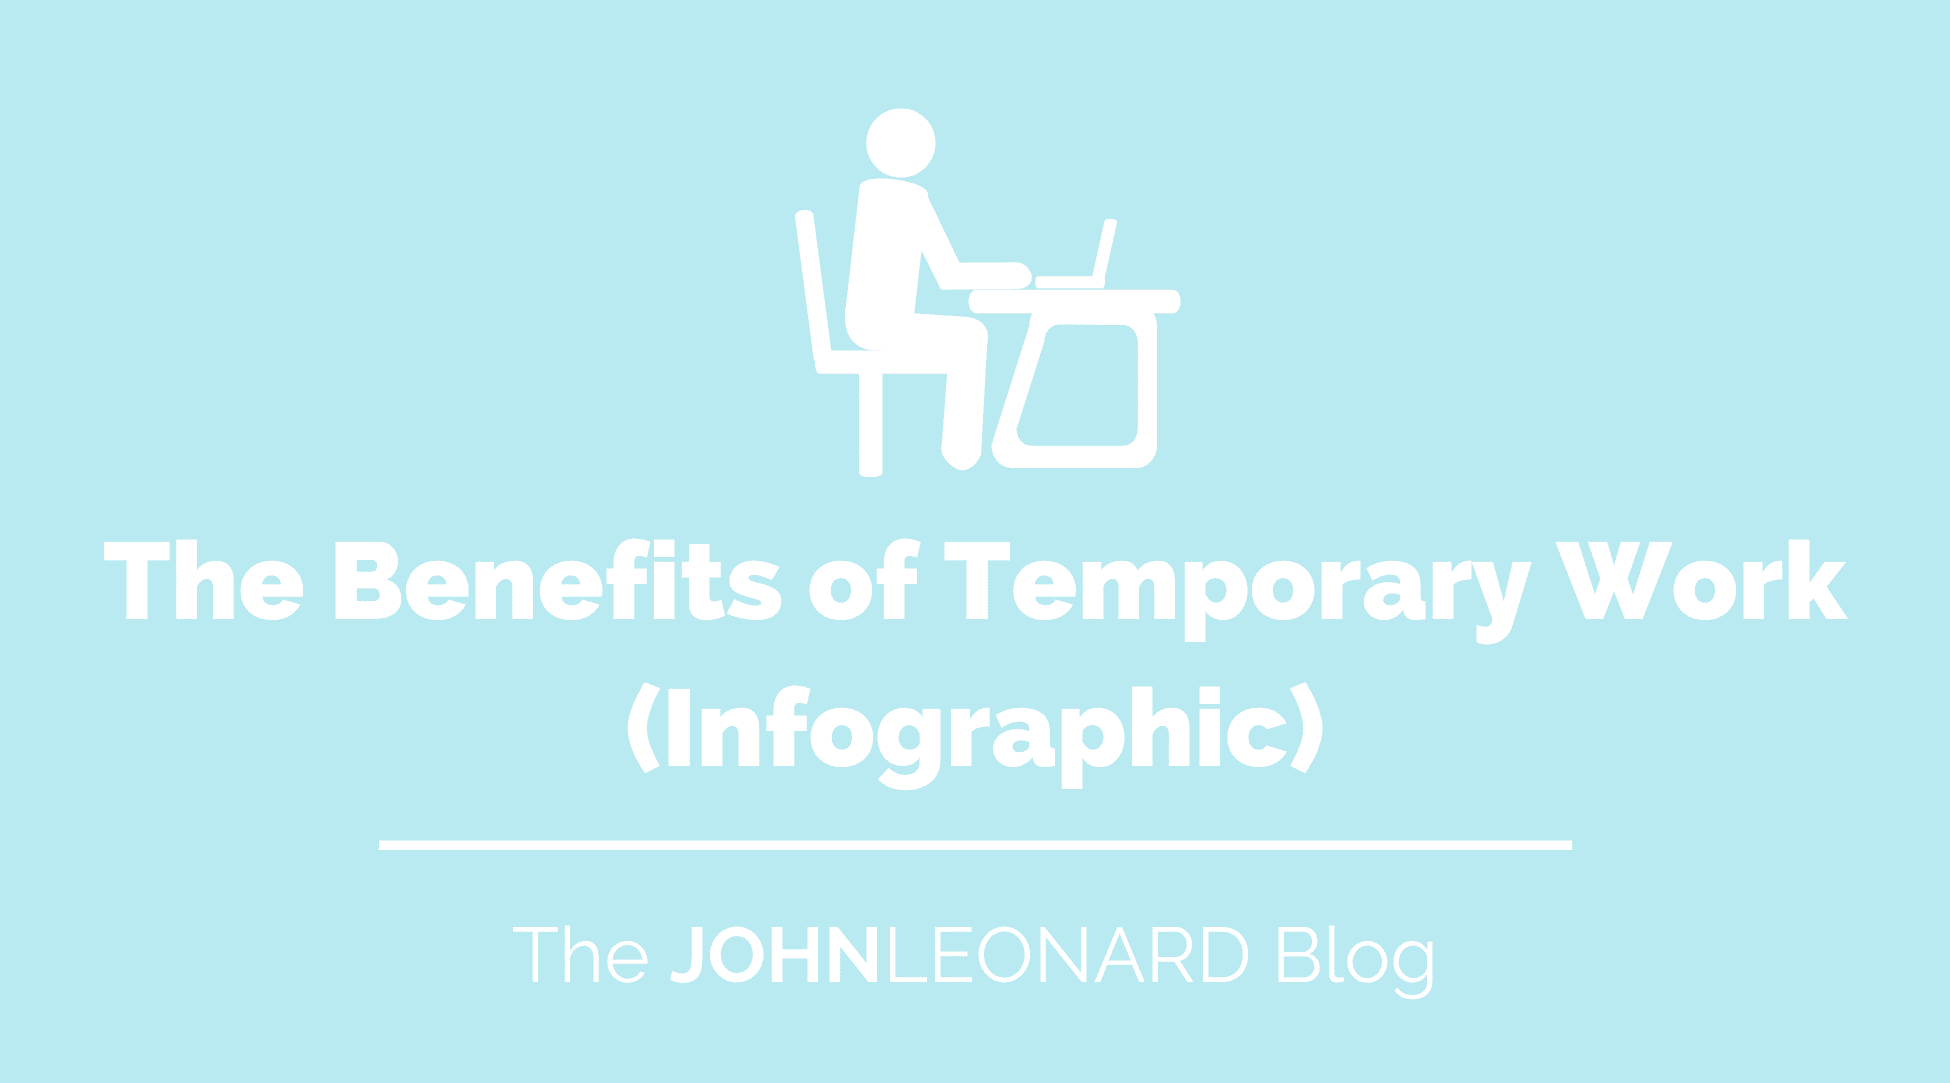 The Benefits of Temporary Work (Infographic)